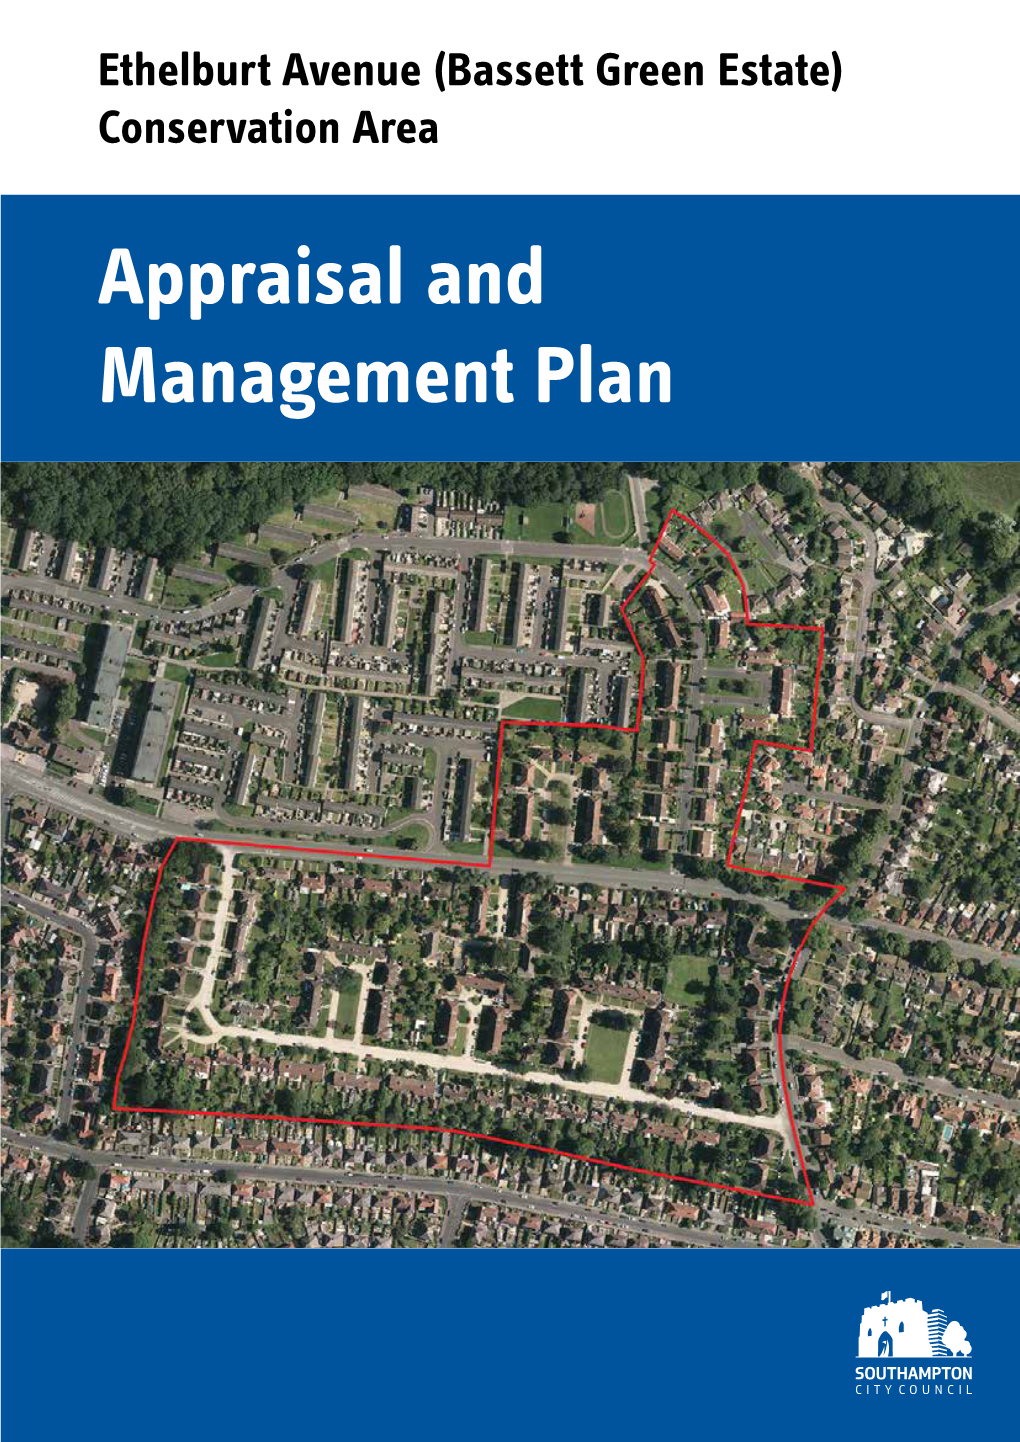 Appraisal and Management Plan Contents